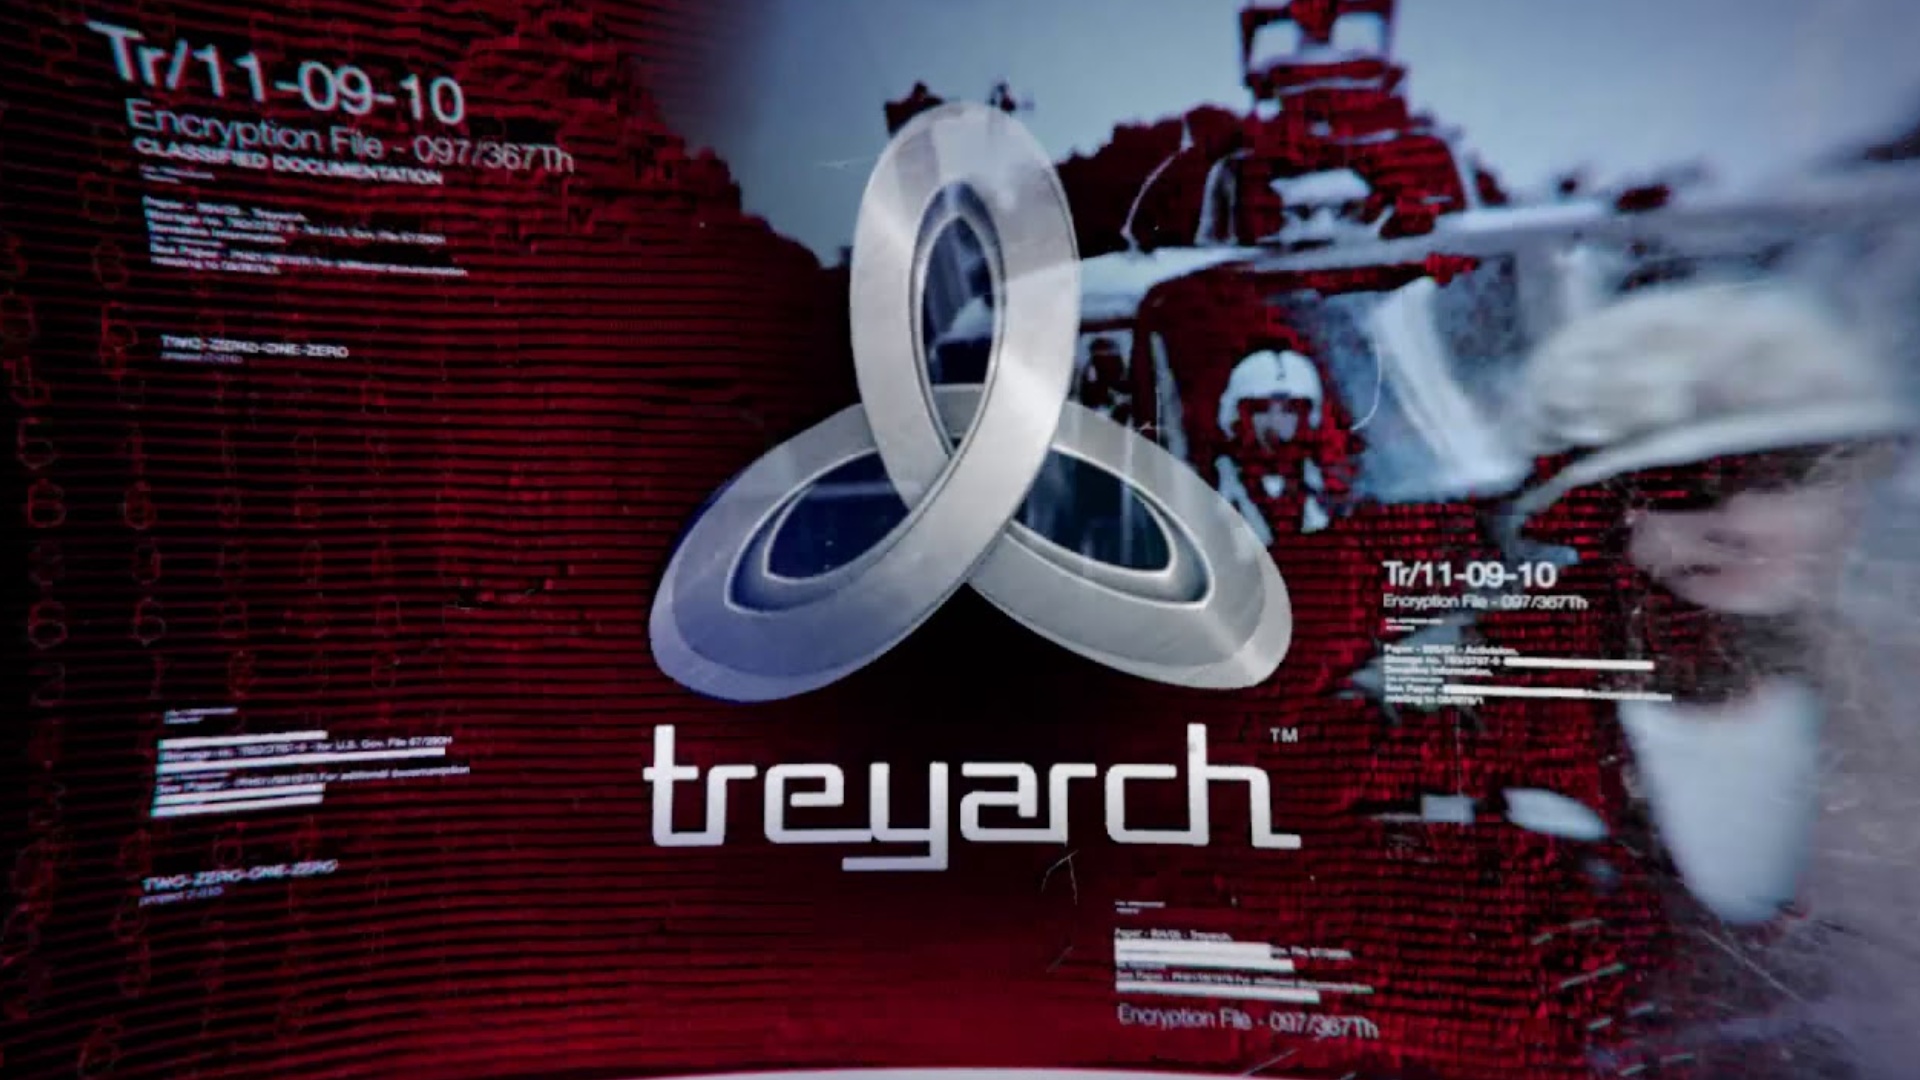 The Treyarch logo from one of the Black Ops titles